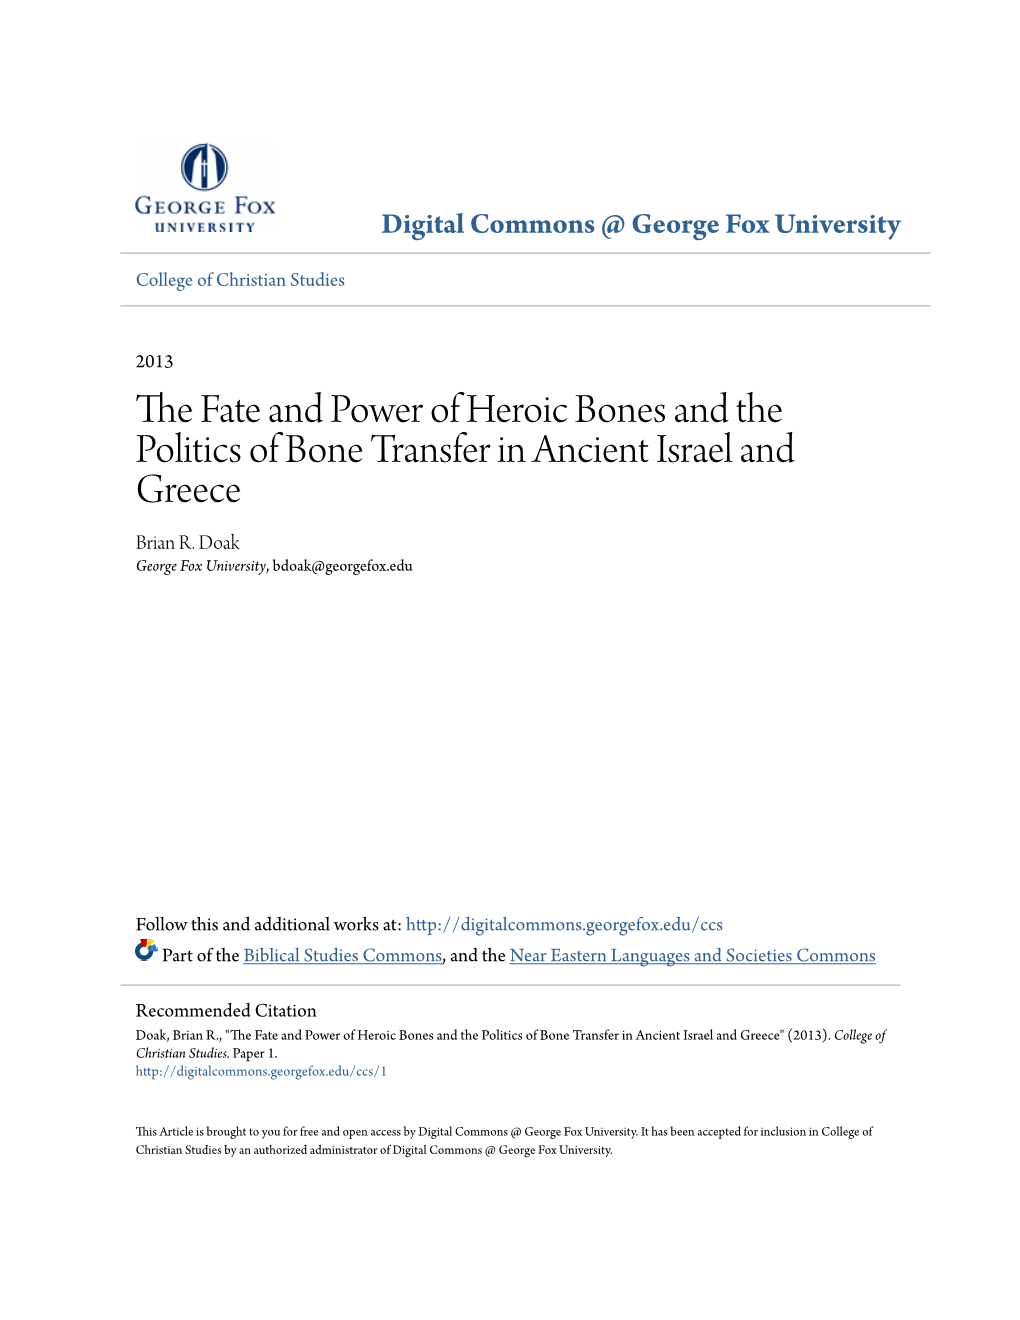 The Fate and Power of Heroic Bones and the Politics of Bone Transfer in Ancient Israel and Greece*